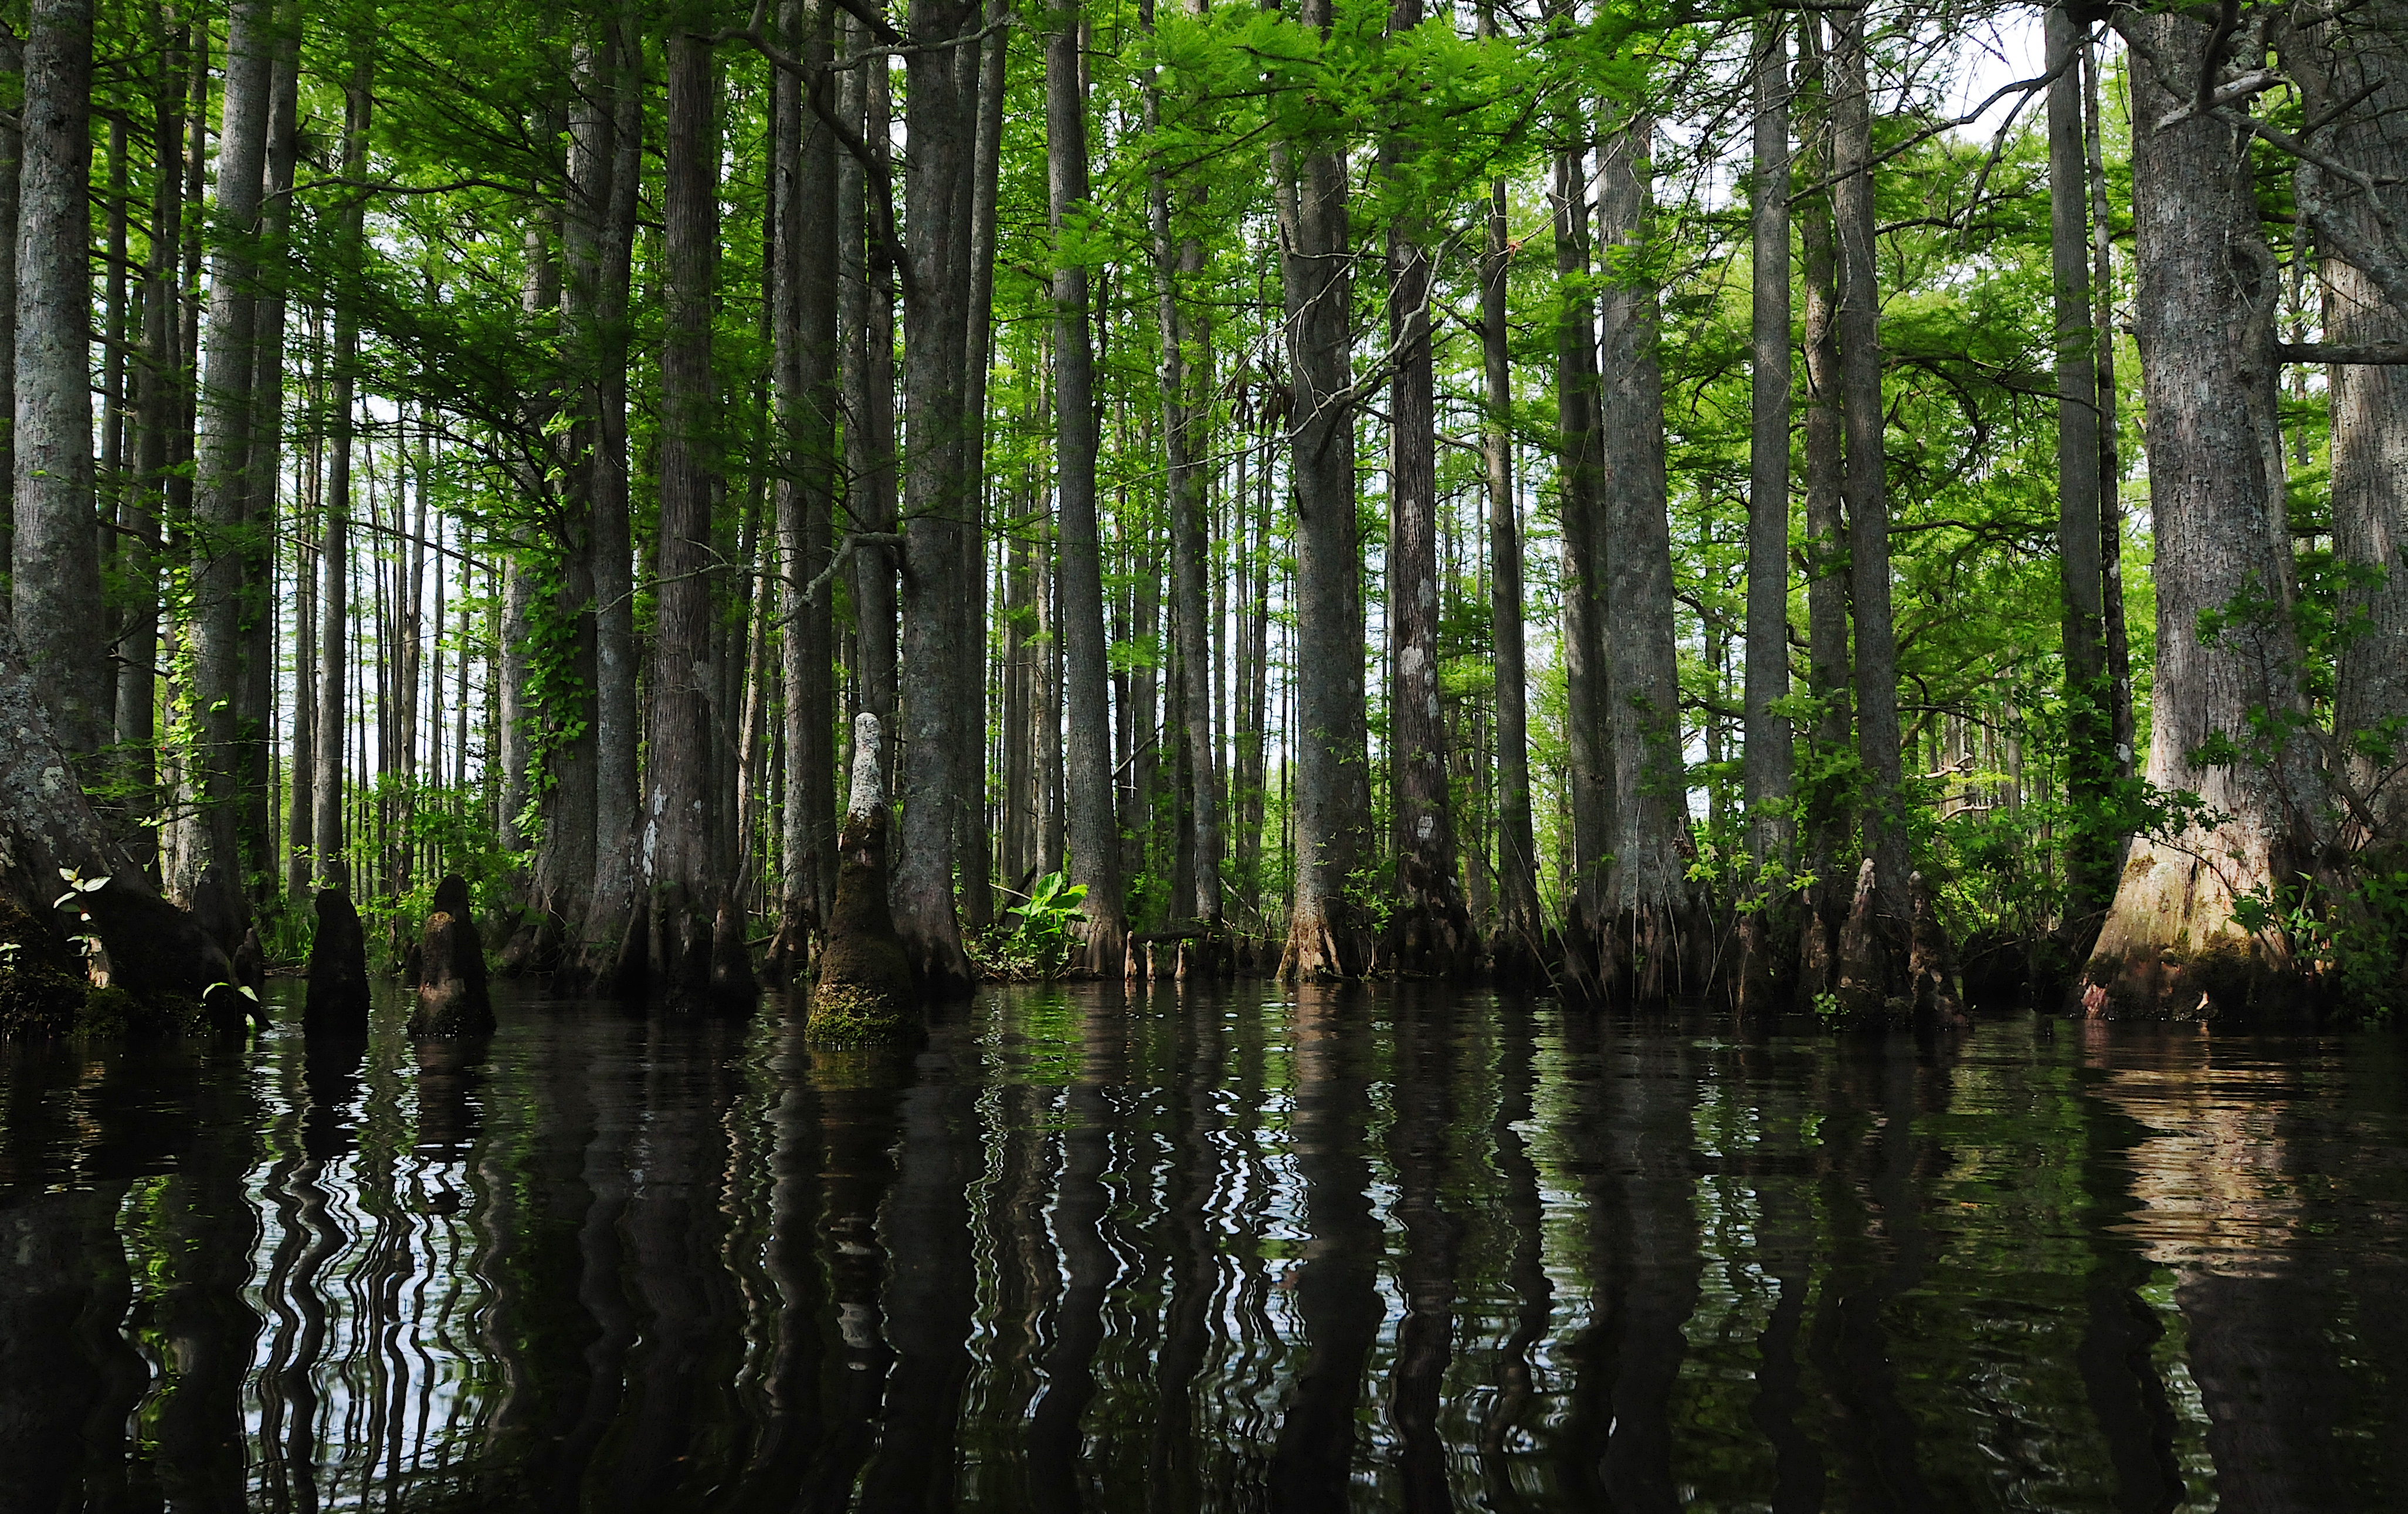 Many baldcypress trees standing in the Chickahominy River